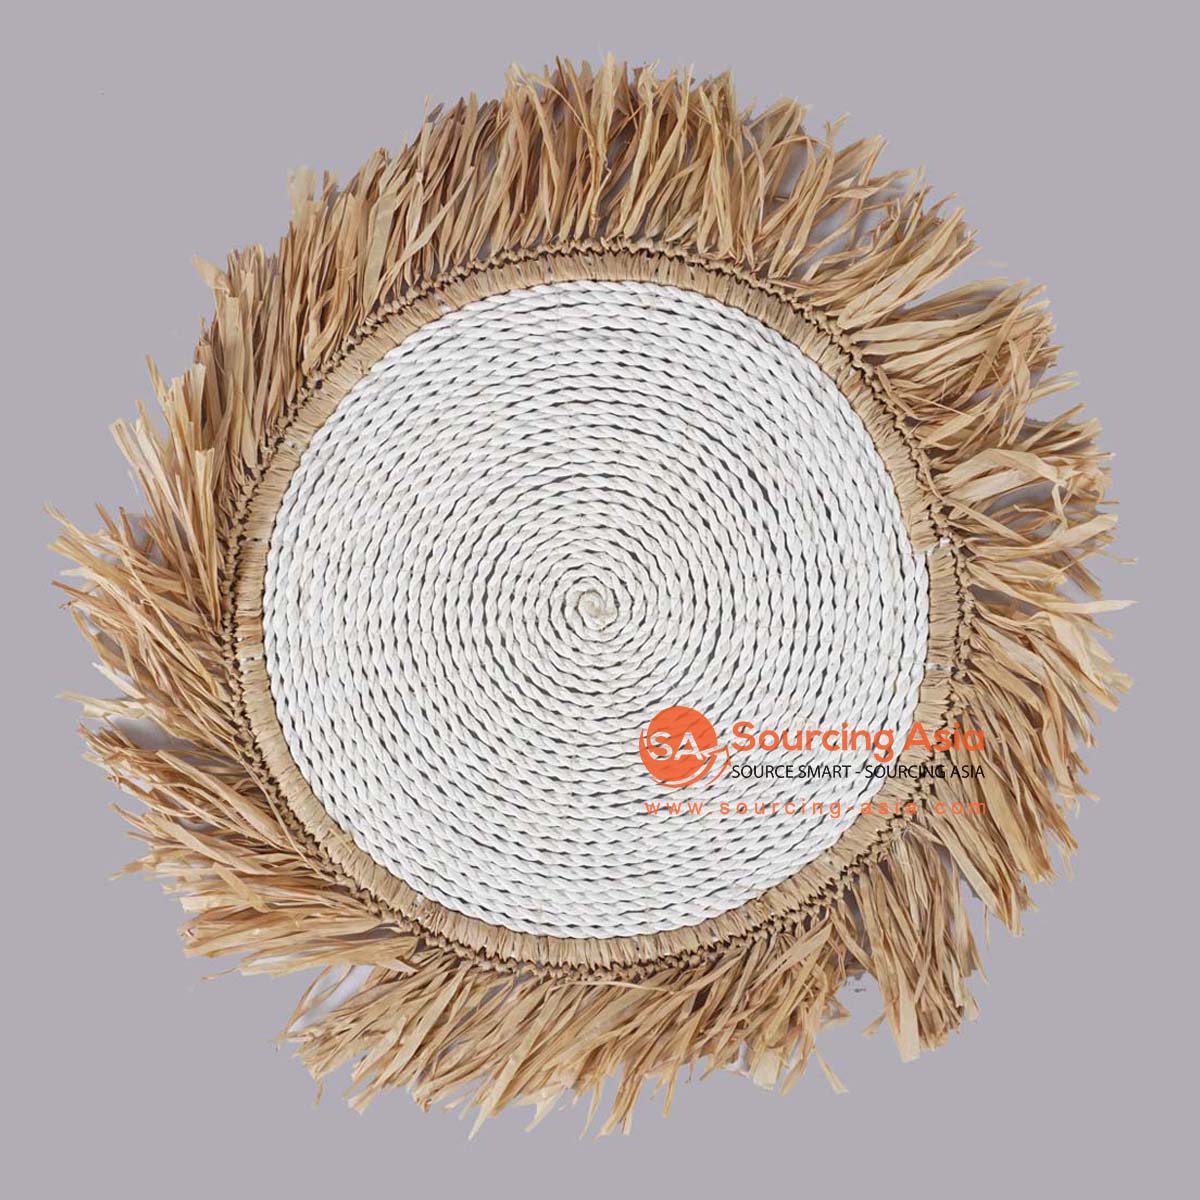 HBSC560 WHITE PLASTIC ROUND PLACEMAT WITH NATURAL GAJIH FRINGE